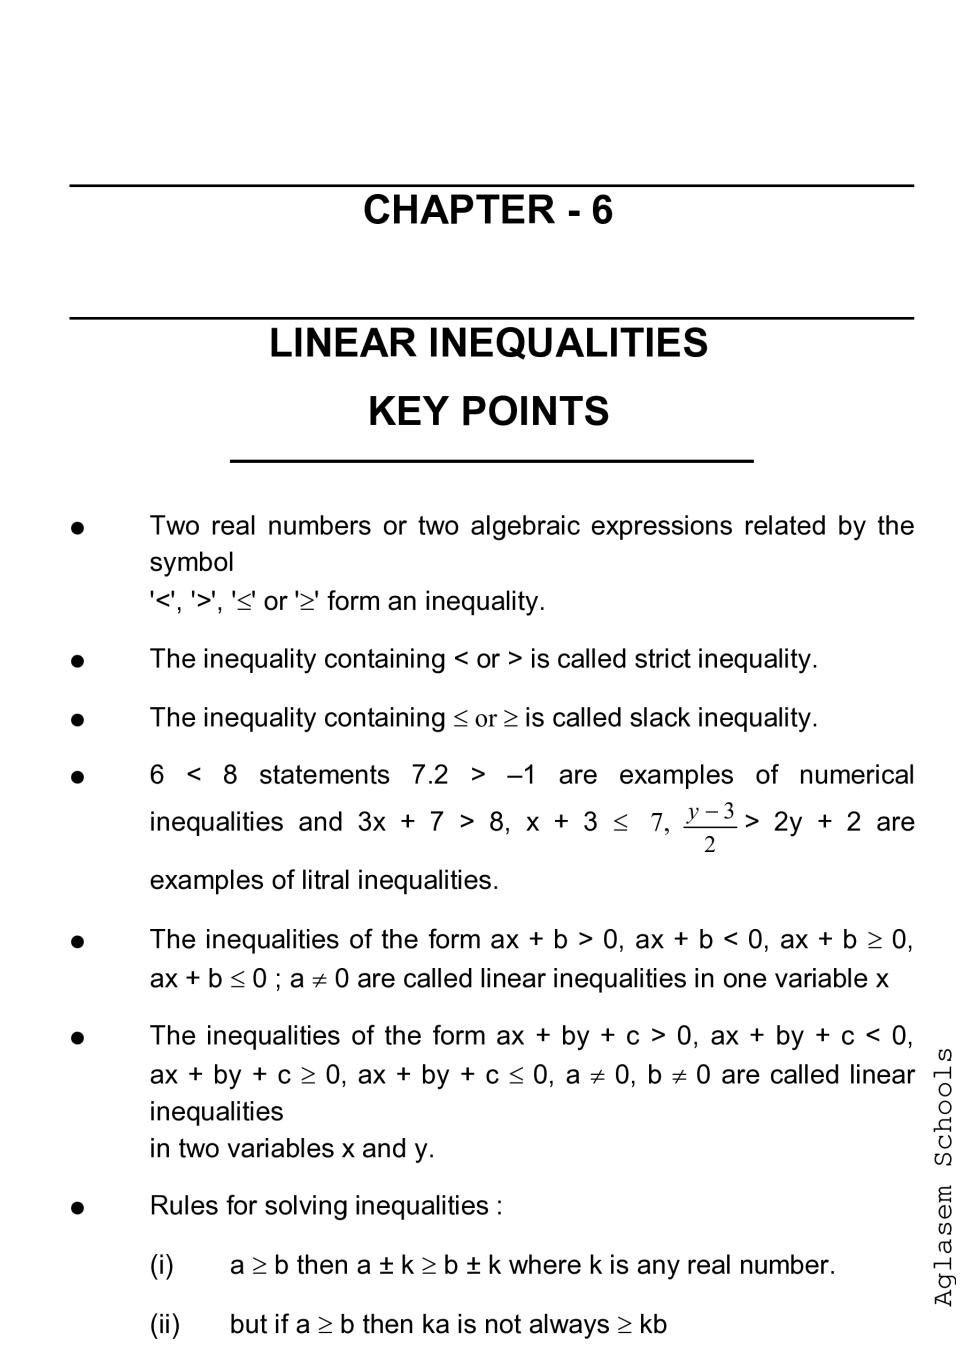 linear inequalities class 11 assignment